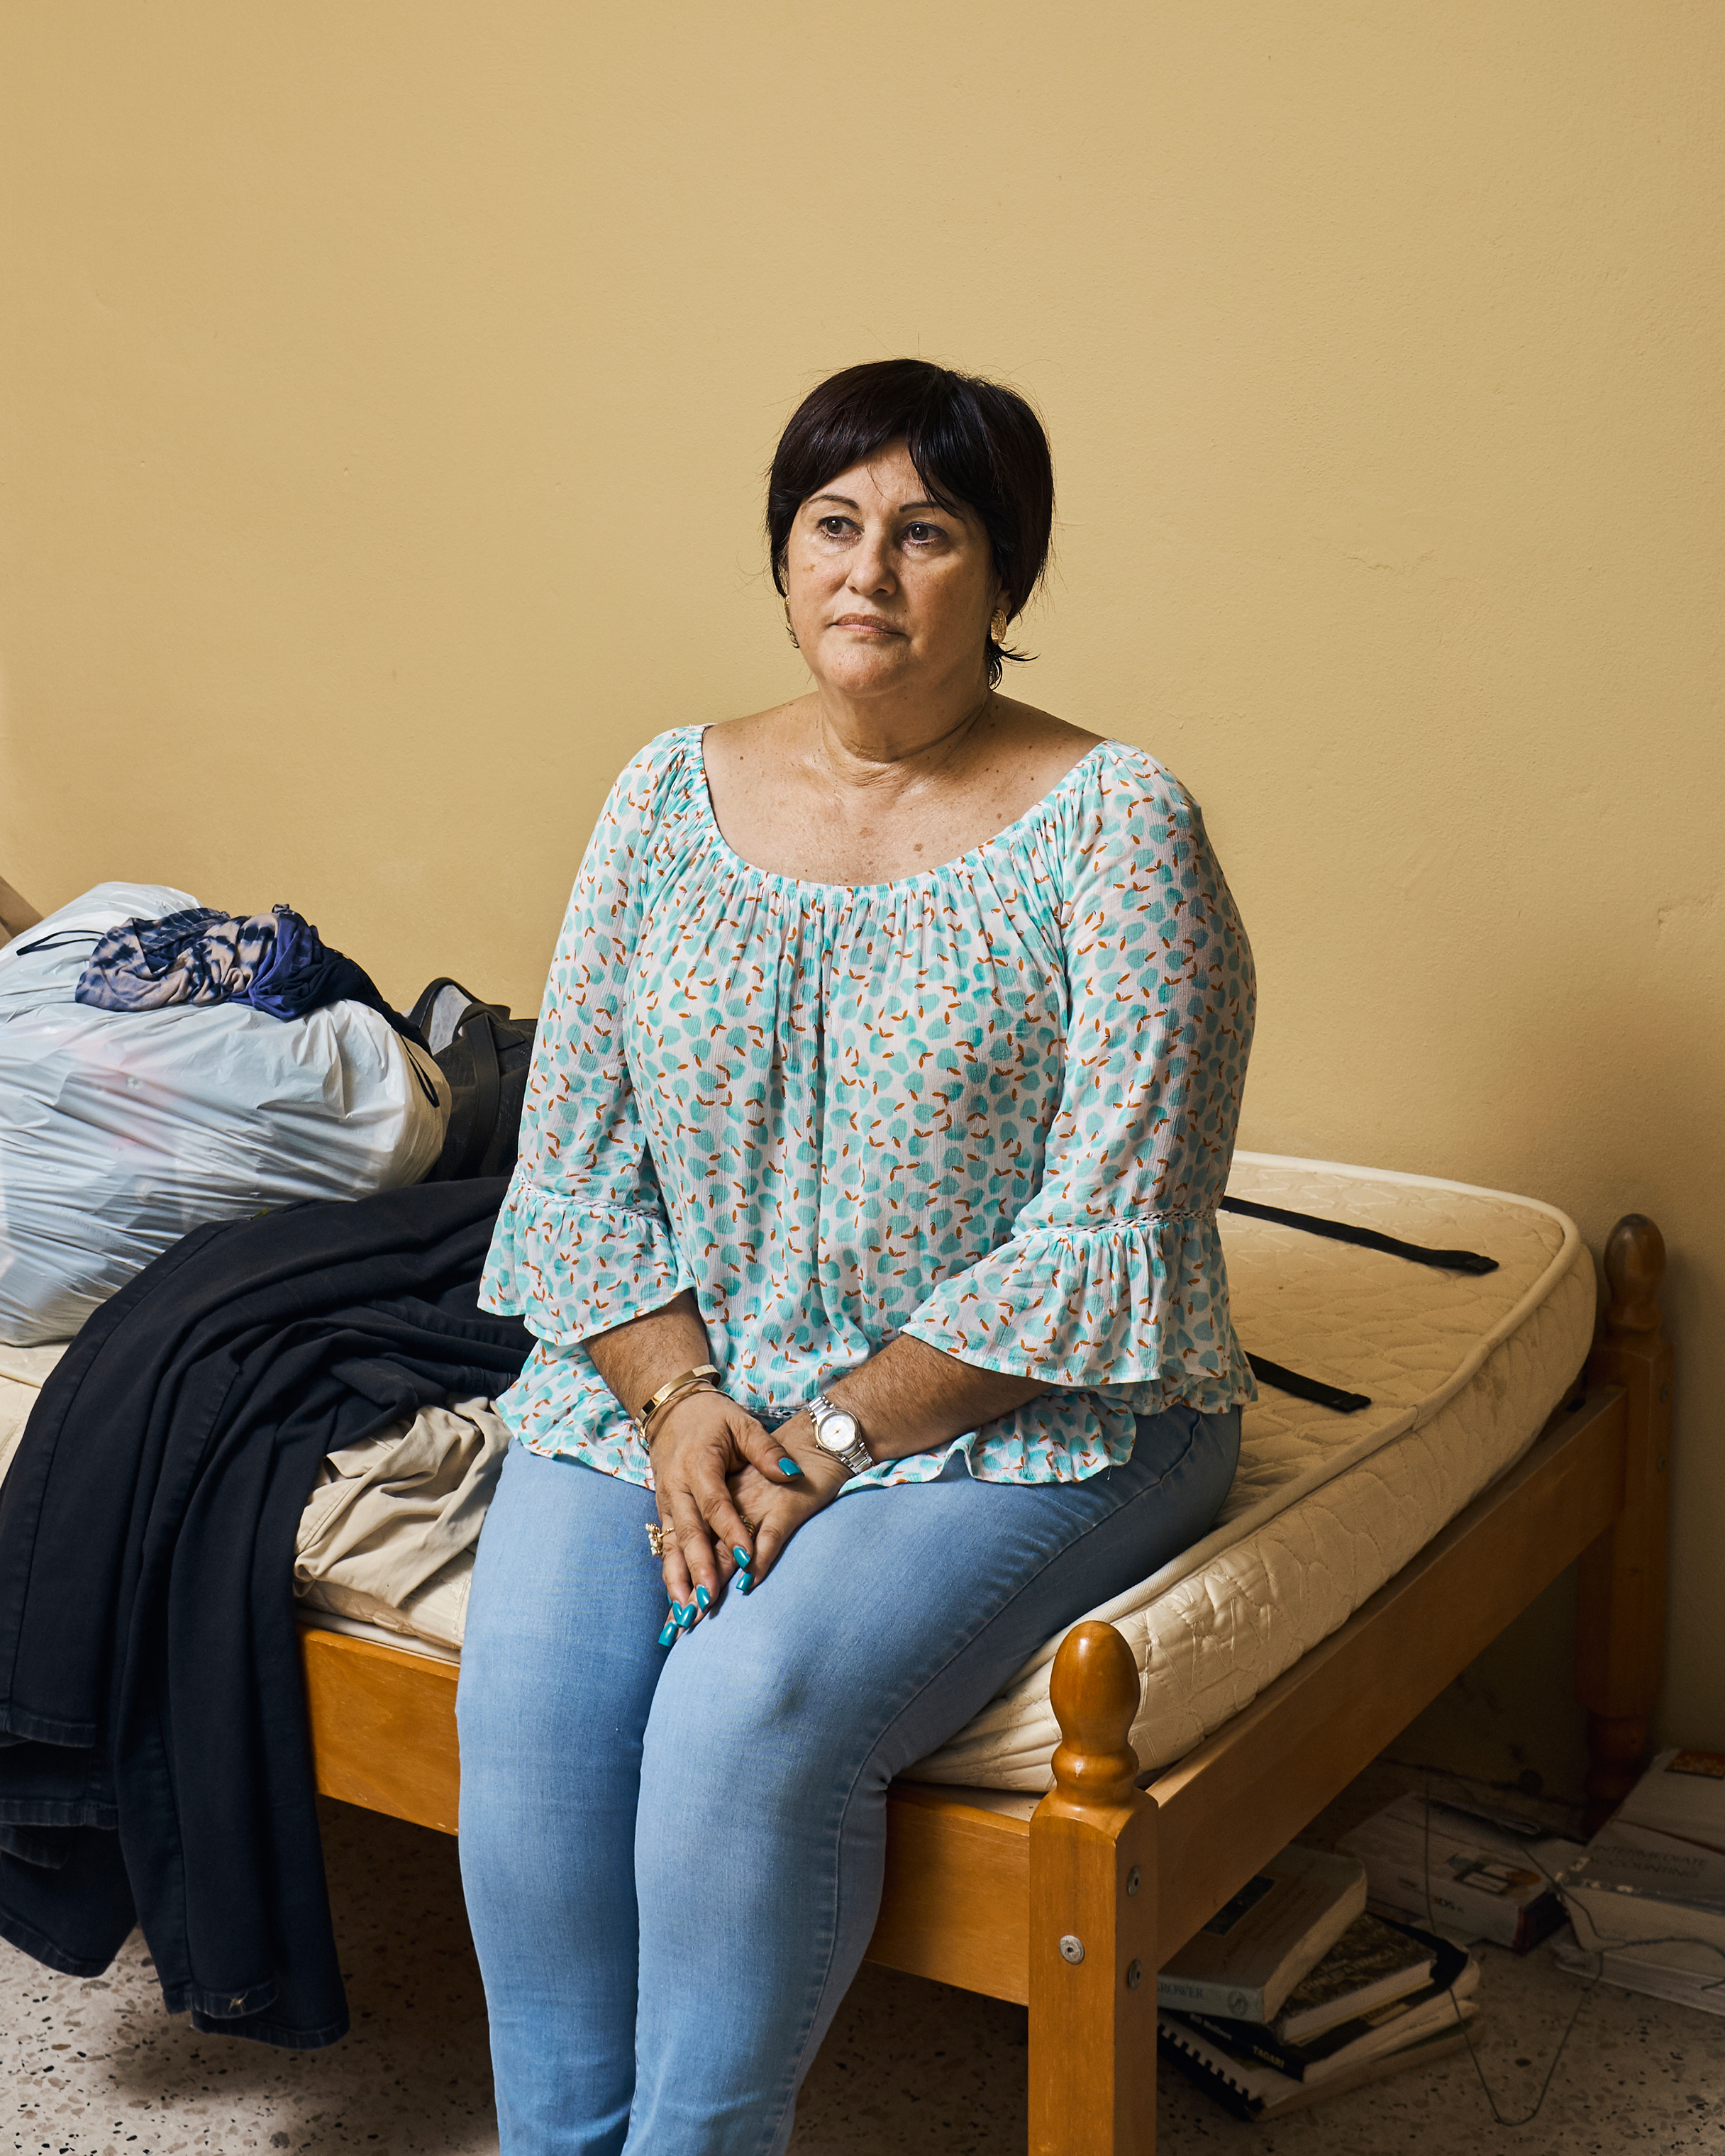 Zilma Maldonado poses in her son Miguel García's room in Utuado on Aug. 31. He and his brother left after the hurricane. (Christopher Gregory for TIME)